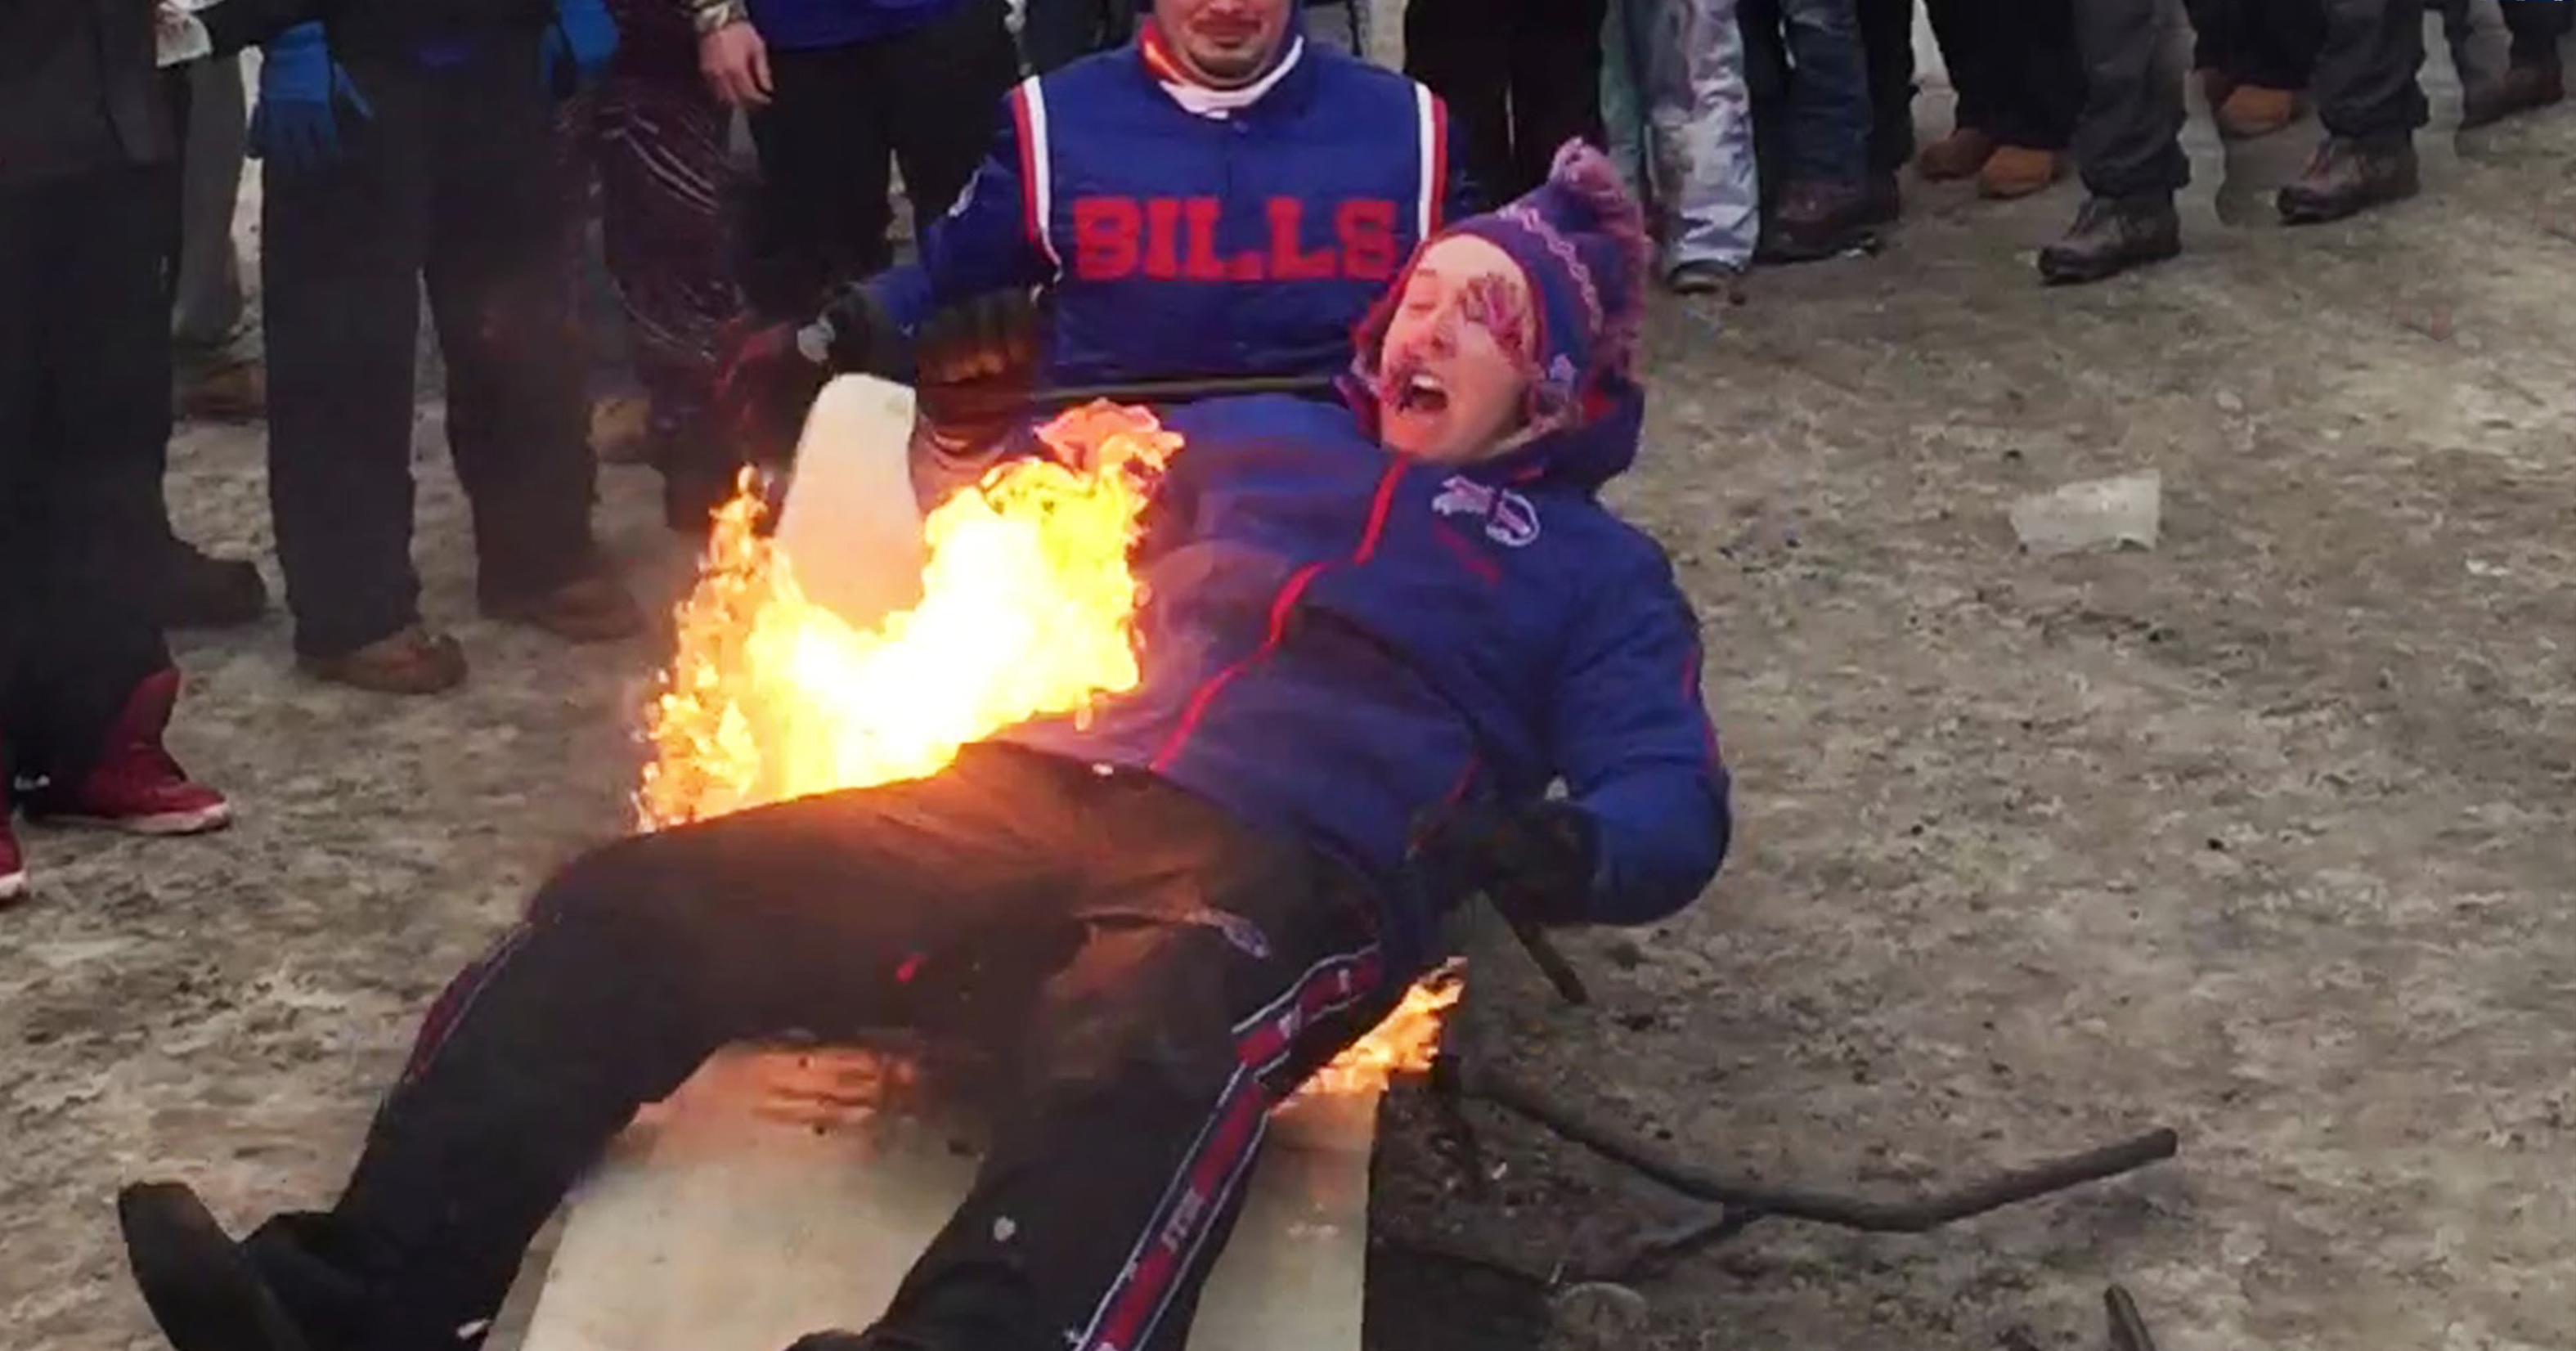 Documentary About Buffalo Bills Fans & Their Crazy Antics Gets Released - Daily Snark3150 x 1652